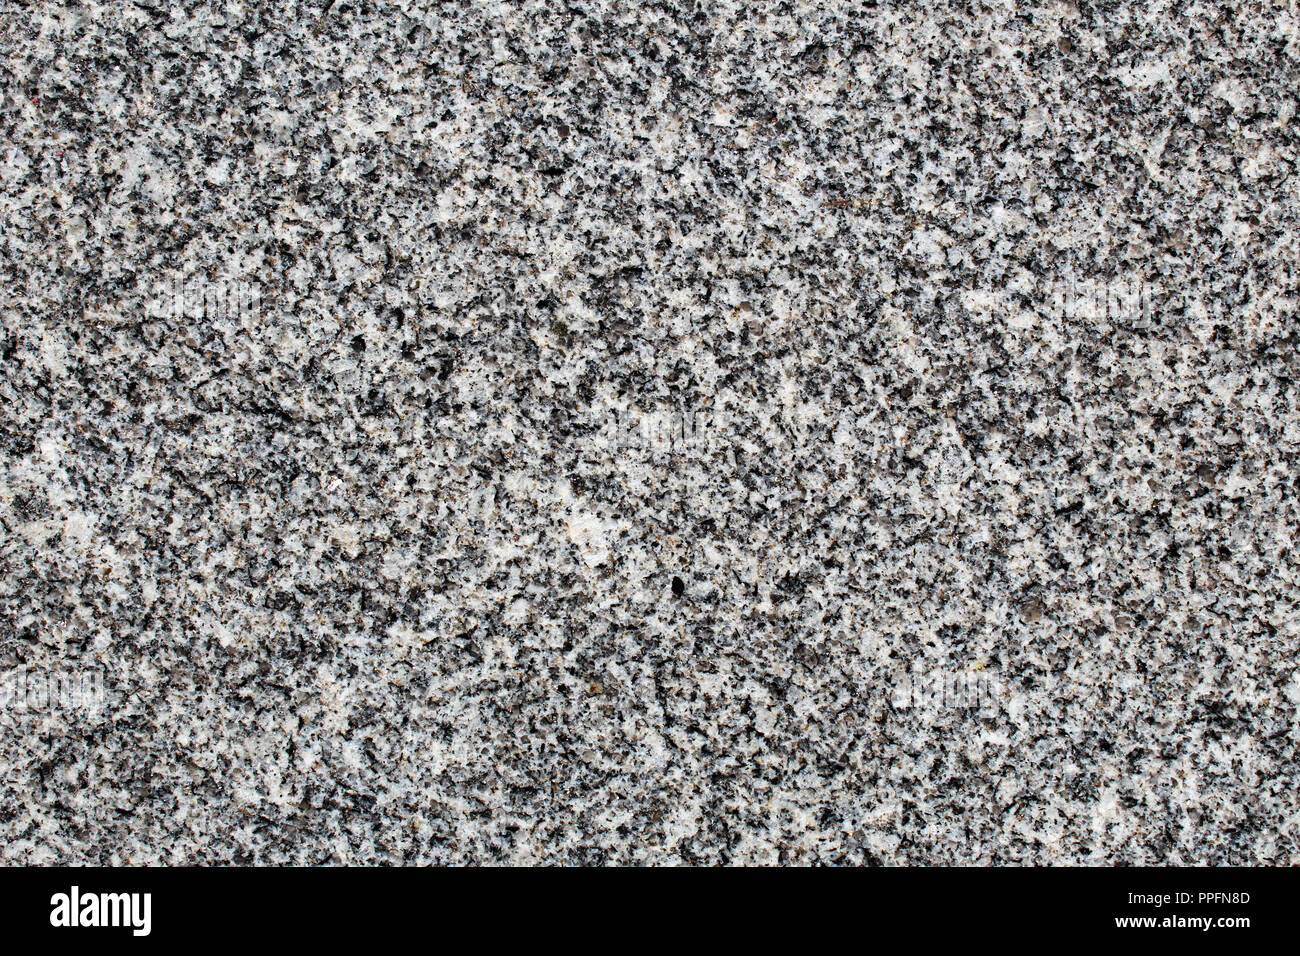 Fine-grained granite rock polished surface seen in detail Stock Photo